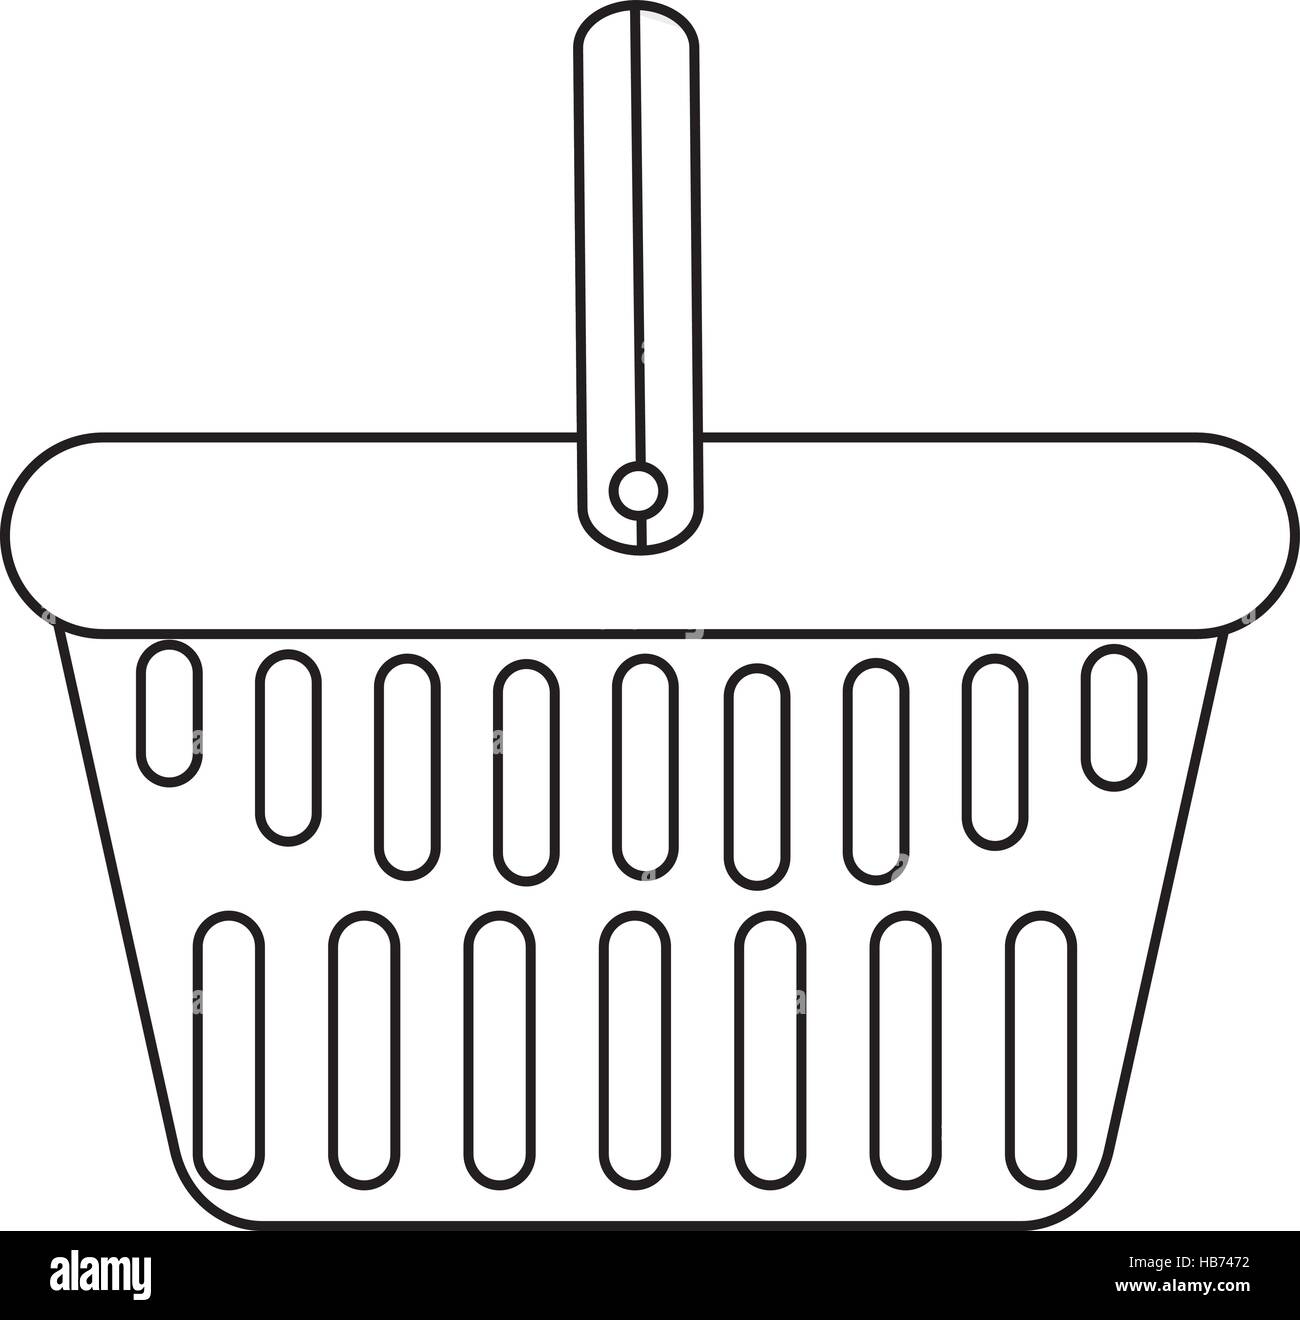 https://c8.alamy.com/comp/HB7472/shopping-basket-icon-modern-line-sketch-doodle-style-plastic-in-a-HB7472.jpg